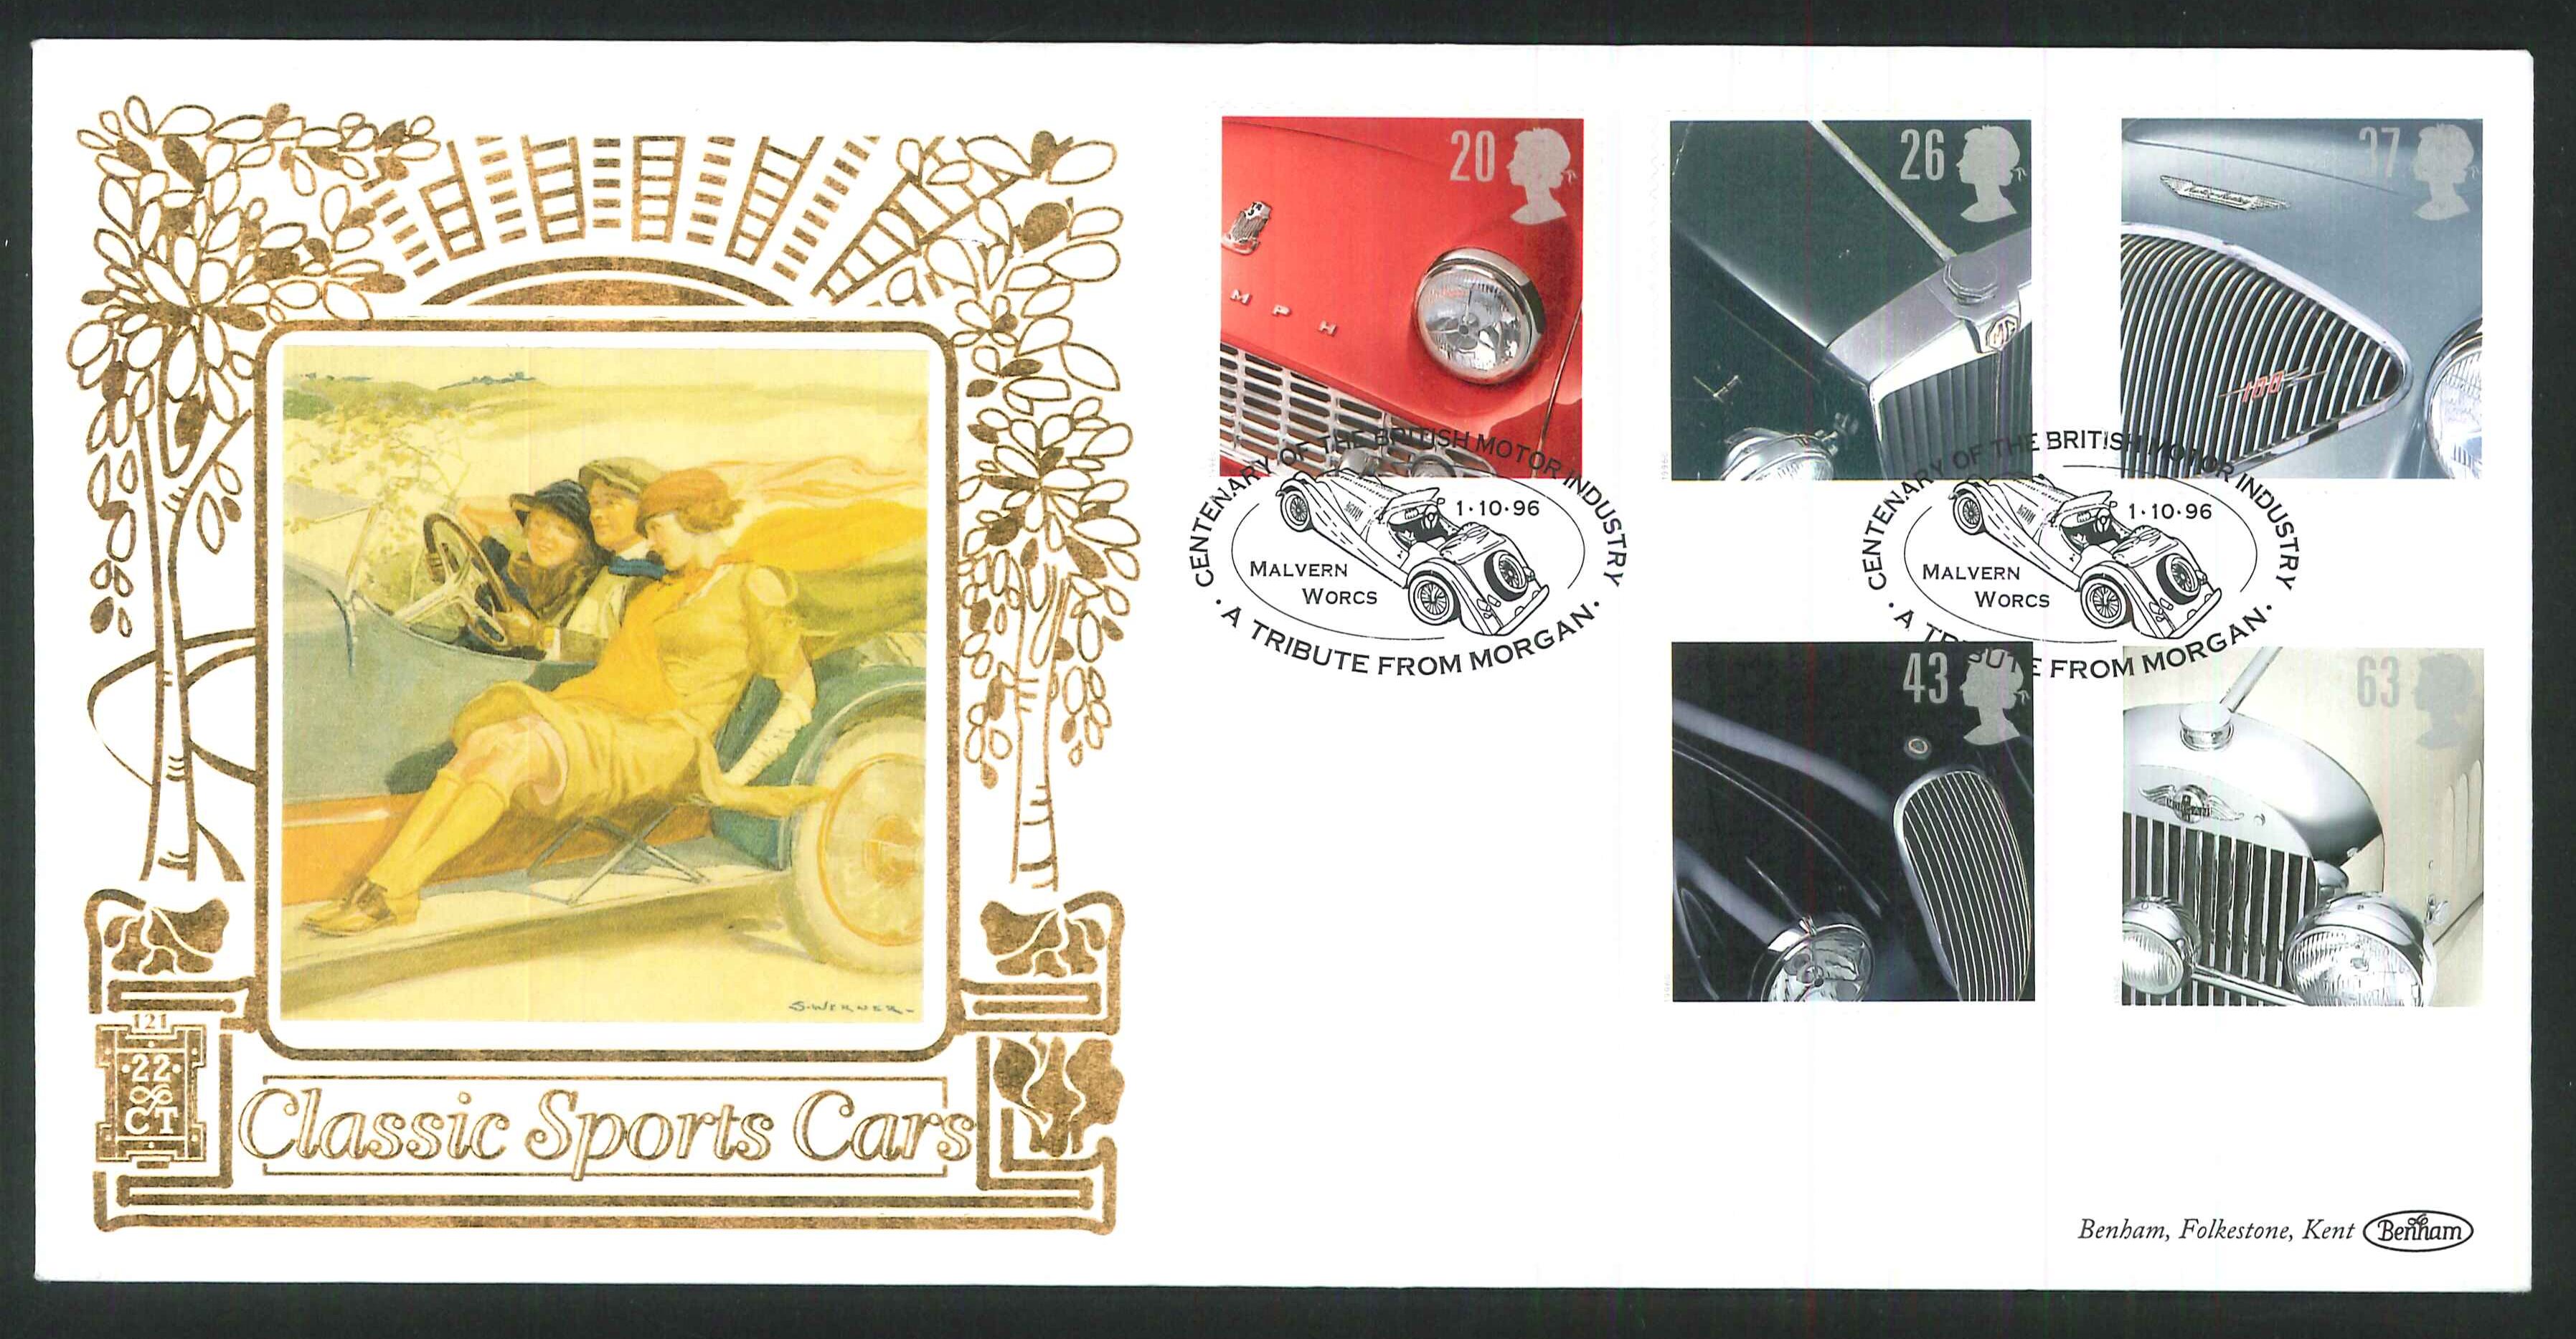 1996 - Classic Sports Cars FDC - A Tribute from Morgan, Malvern,Worcs Pmk - Click Image to Close